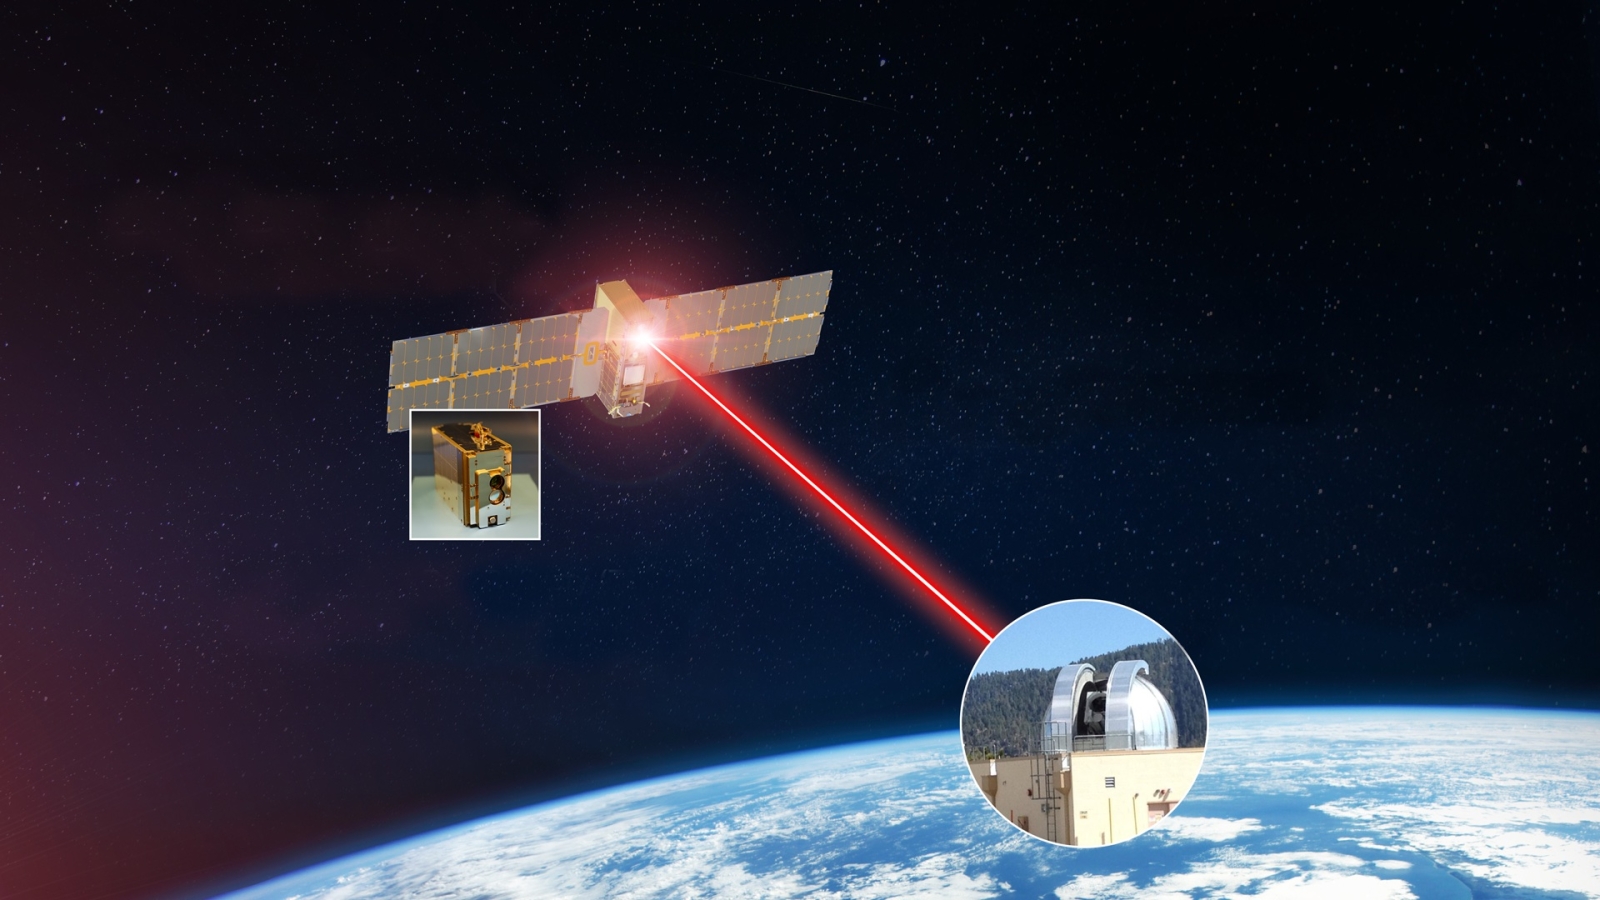 An illustration of data being sent across a laser from a small satellite to a ground station on Earth.